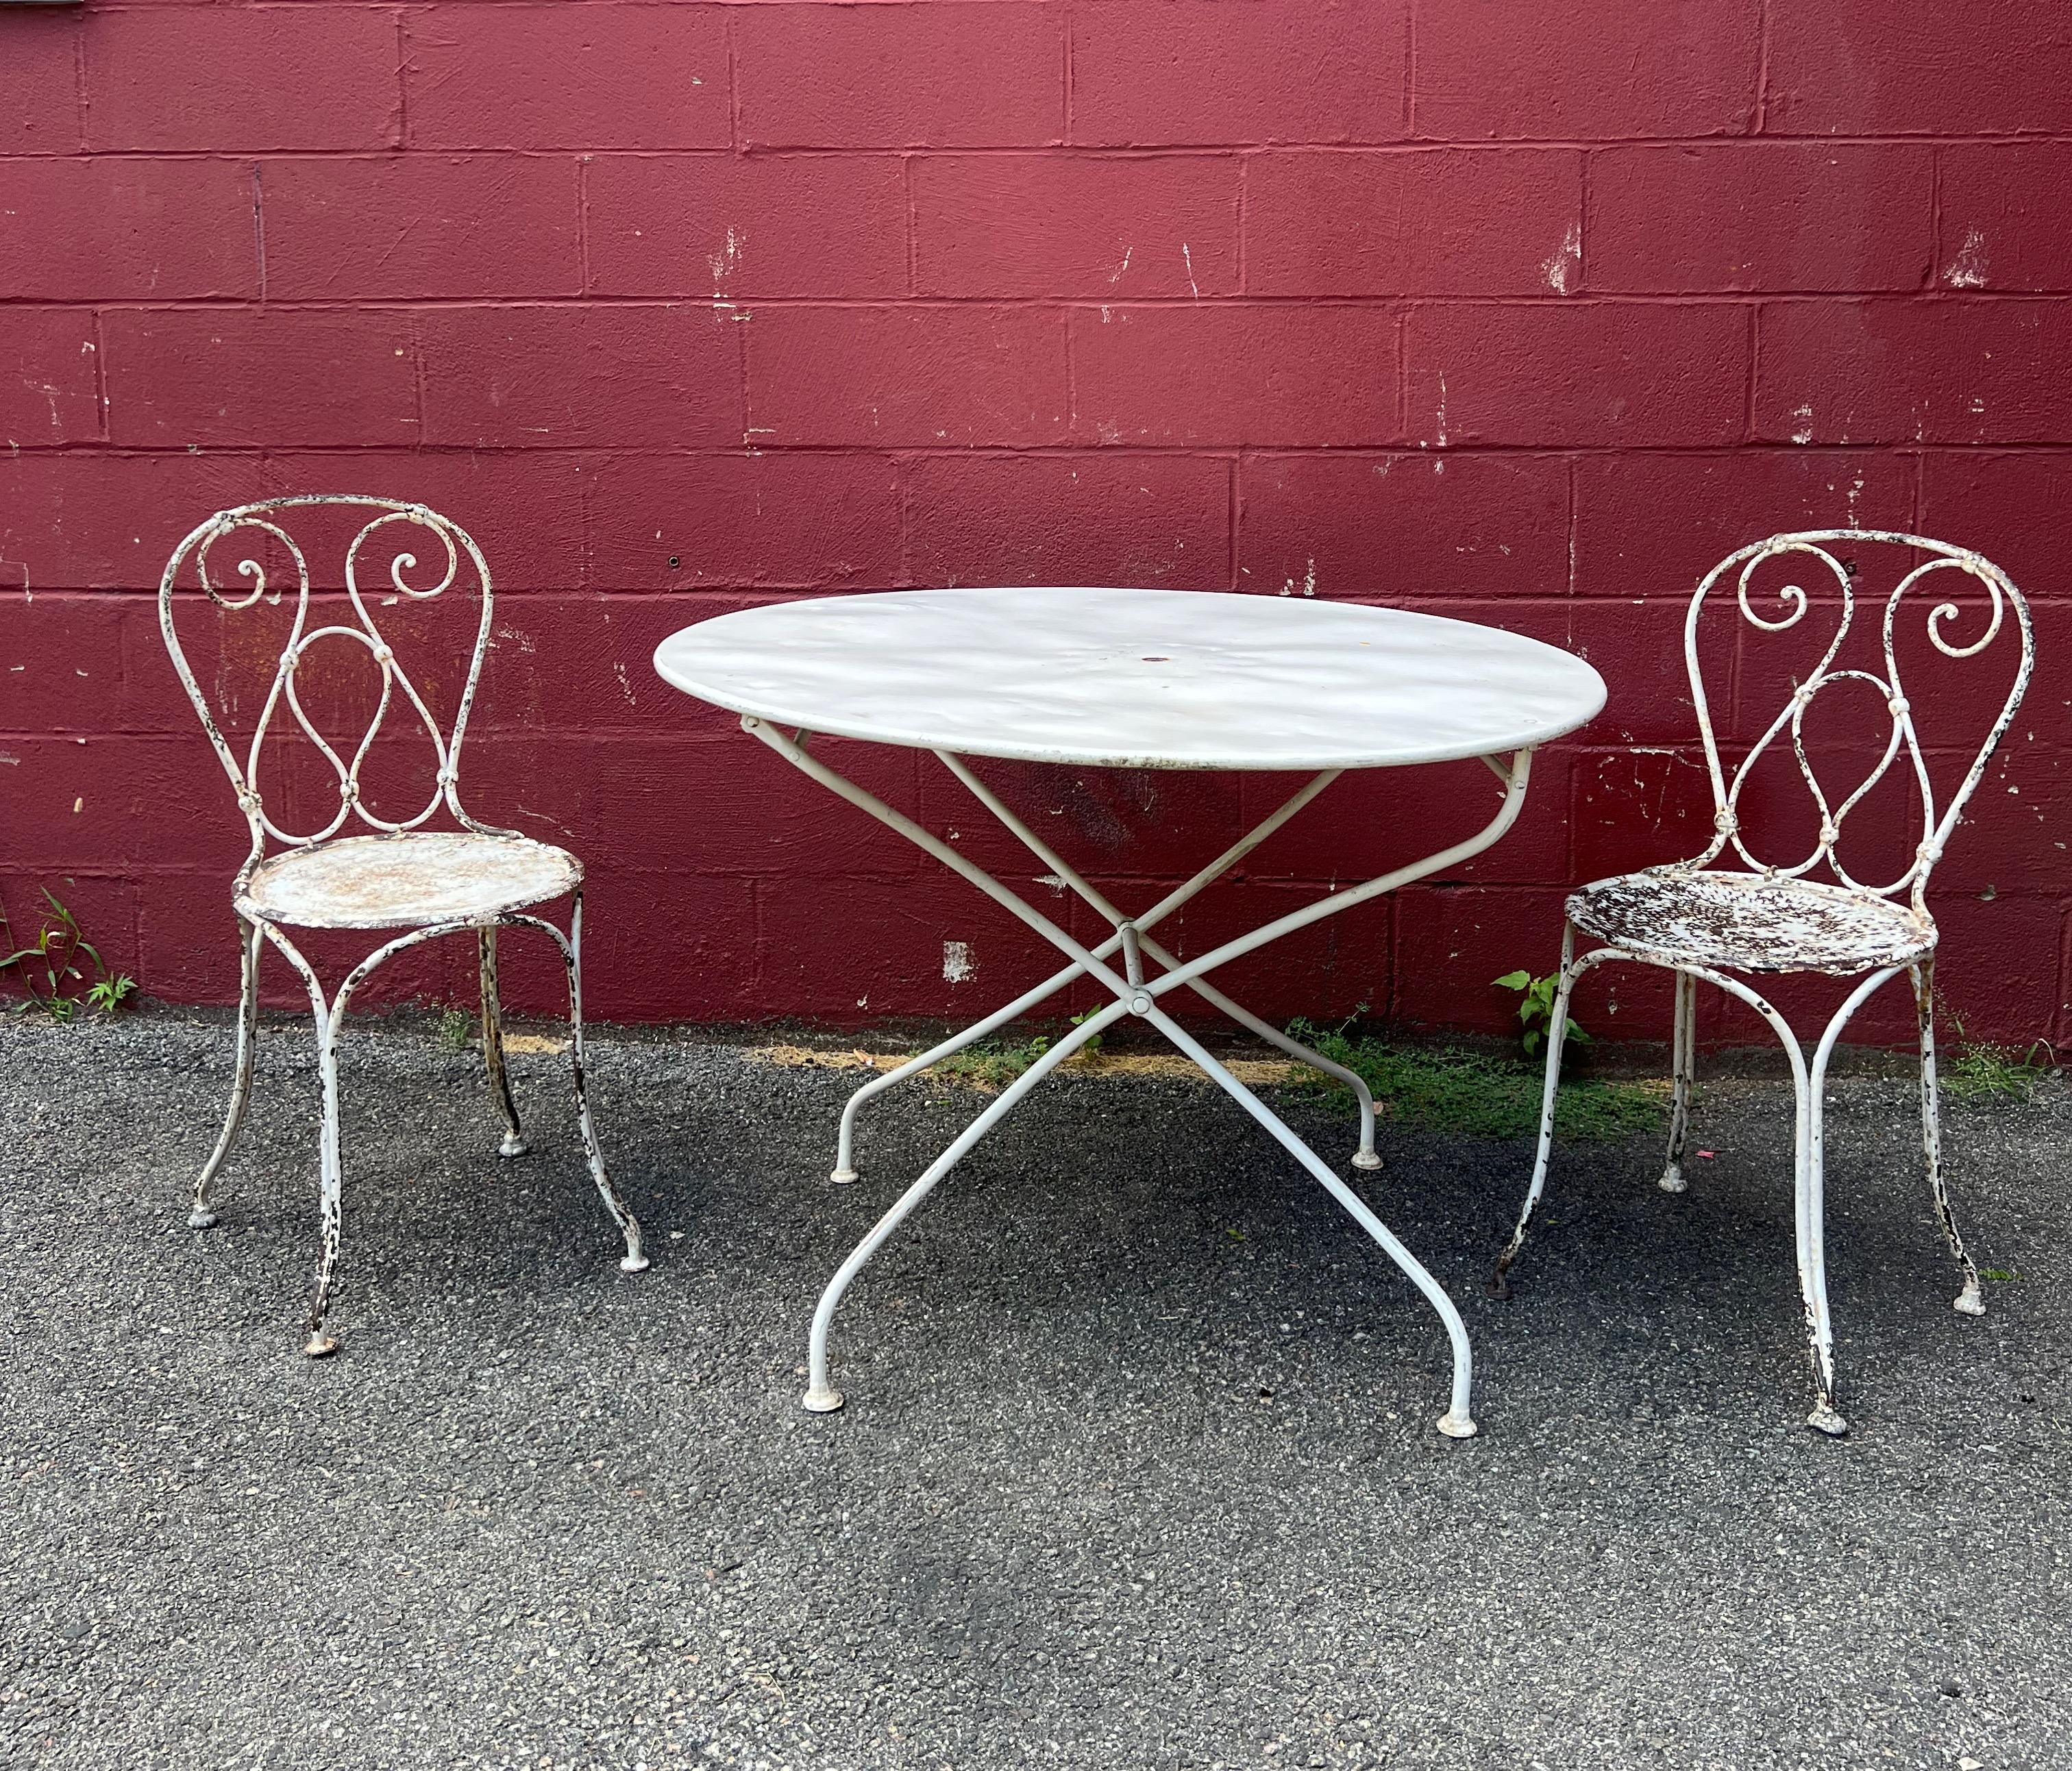 These late 19th Century French iron garden chairs are the perfect addition to any outdoor space. The classic scrolled design is especially nice on this unusual pair, with one seat made of perforated metal and the other solid with no perforations.